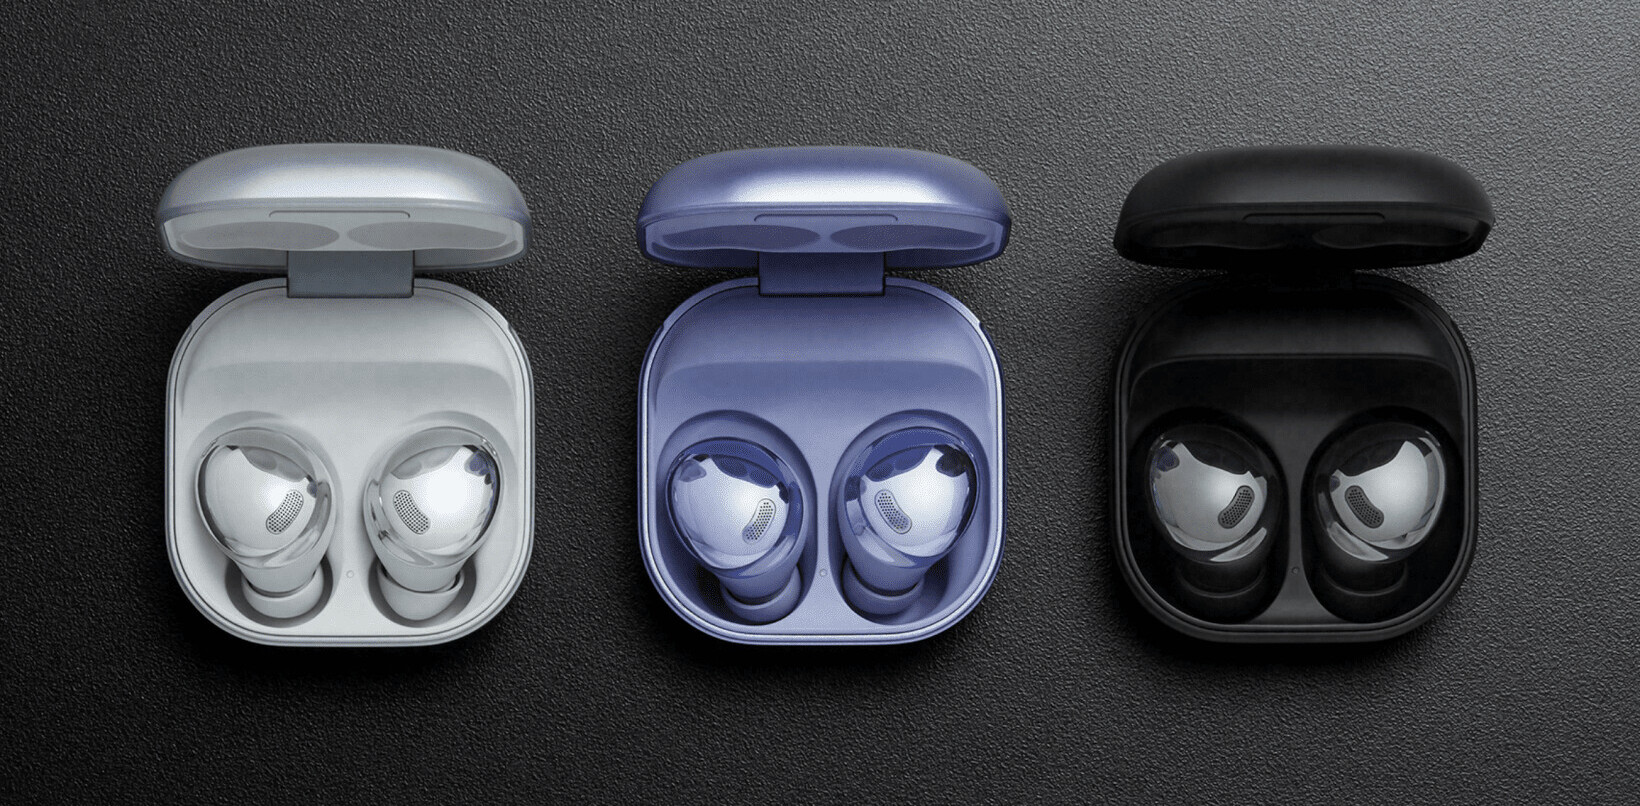 The Galaxy Buds Pro are Samsung’s answer to the AirPods Pro